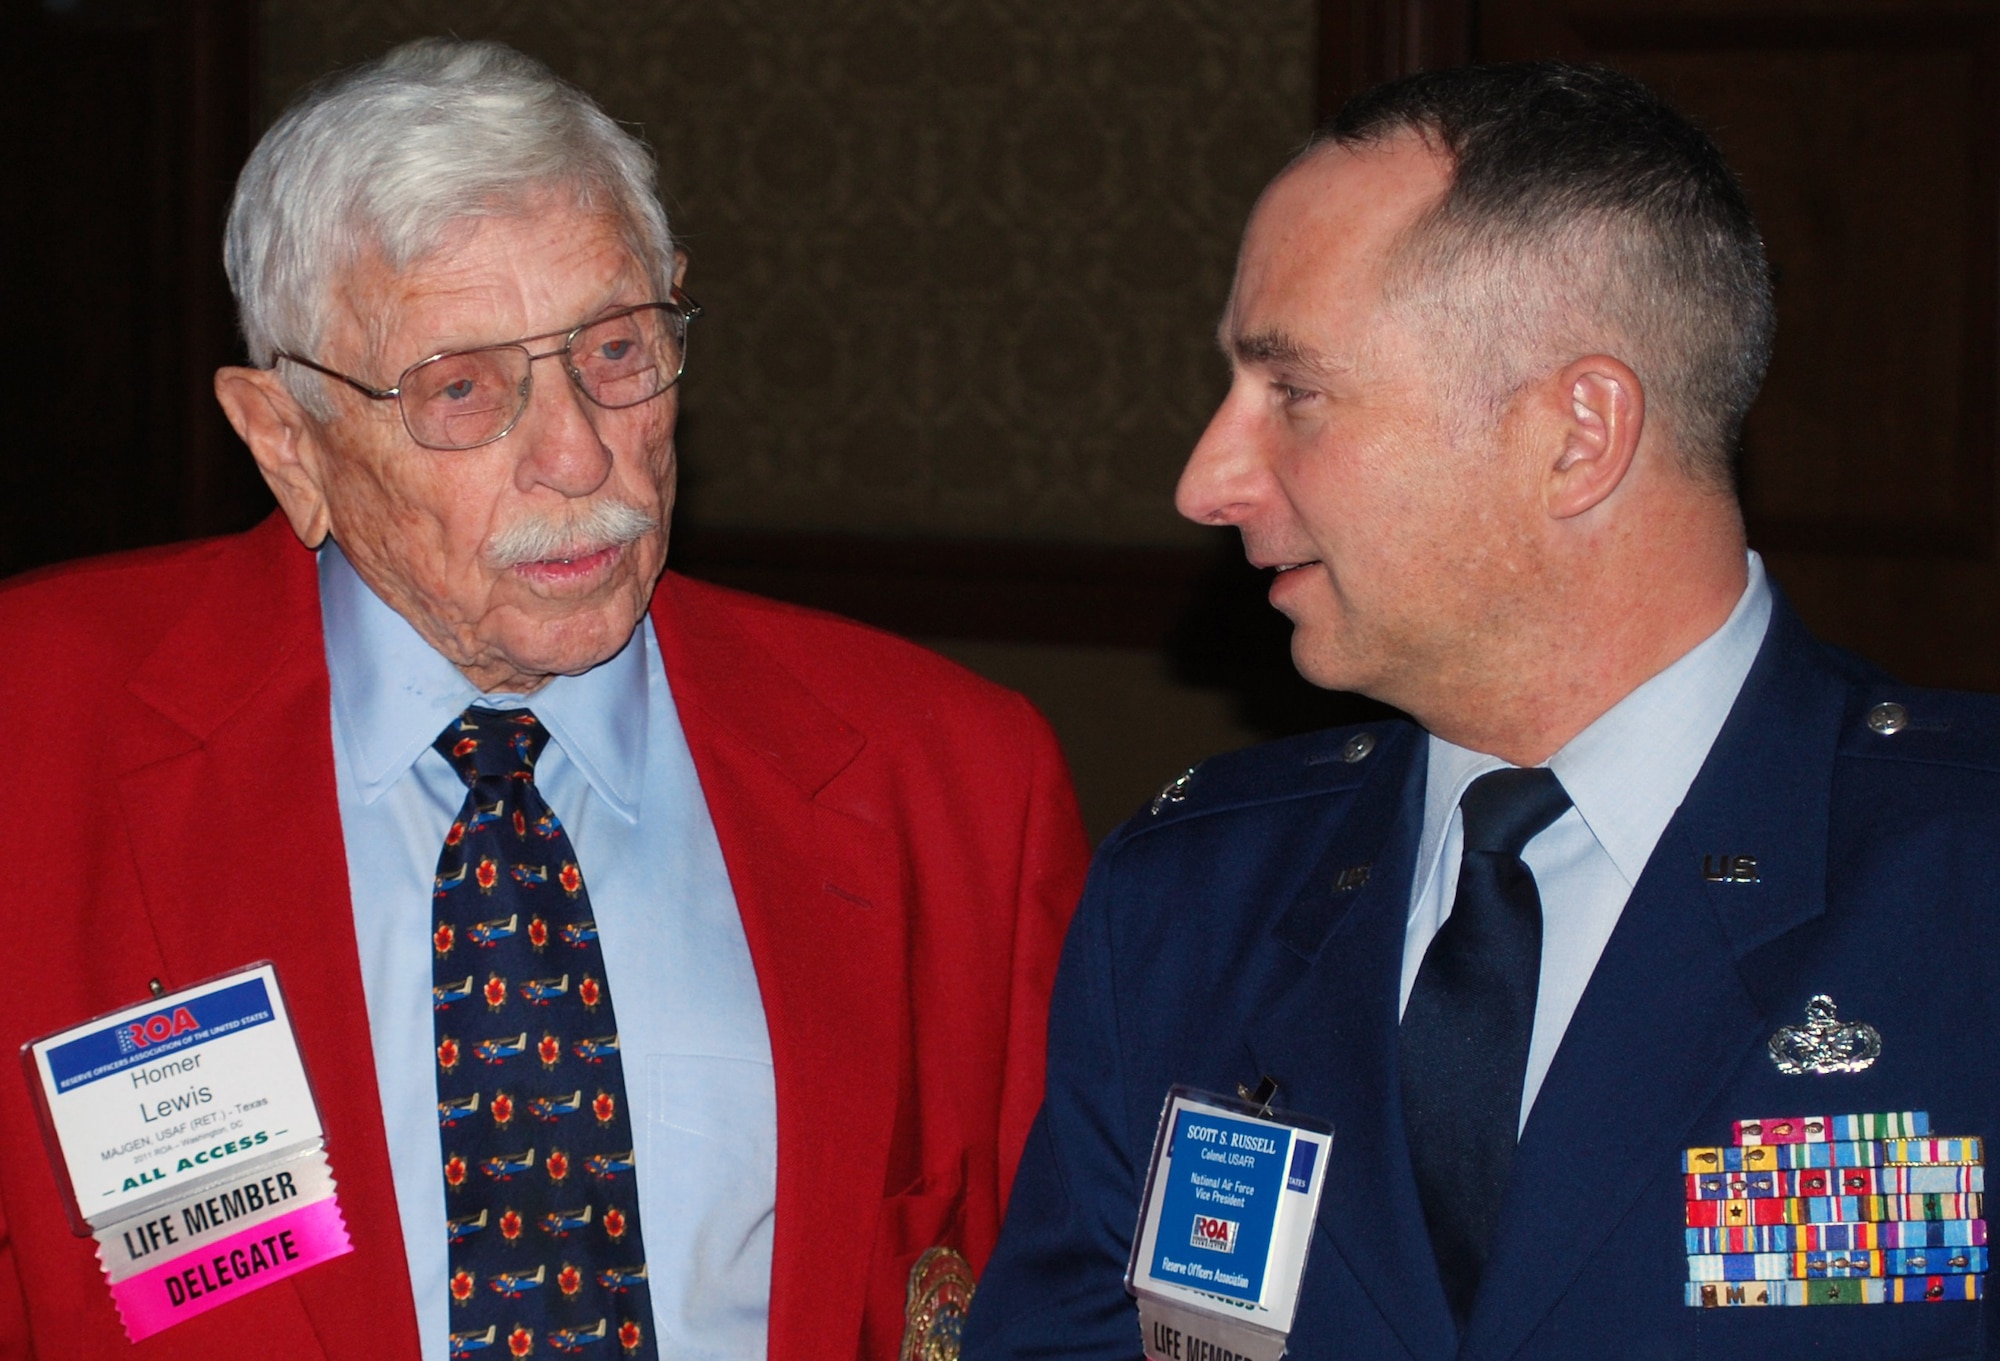 Retired Air Force Maj. Gen. Homer I. Lewis philosophizes with Col. Scott S. Russell, ROA's National Air Force vice president at the ROA National Security Symposium in Washington, D.C., Jan. 31, 2011.  General Lewis, 90, and a World War II veteran, served as the chief of the Air Force Reserve from 1971 to 1975 and is a past president of the ROA. (U.S. Air Force photo/Col. Bob Thompson)